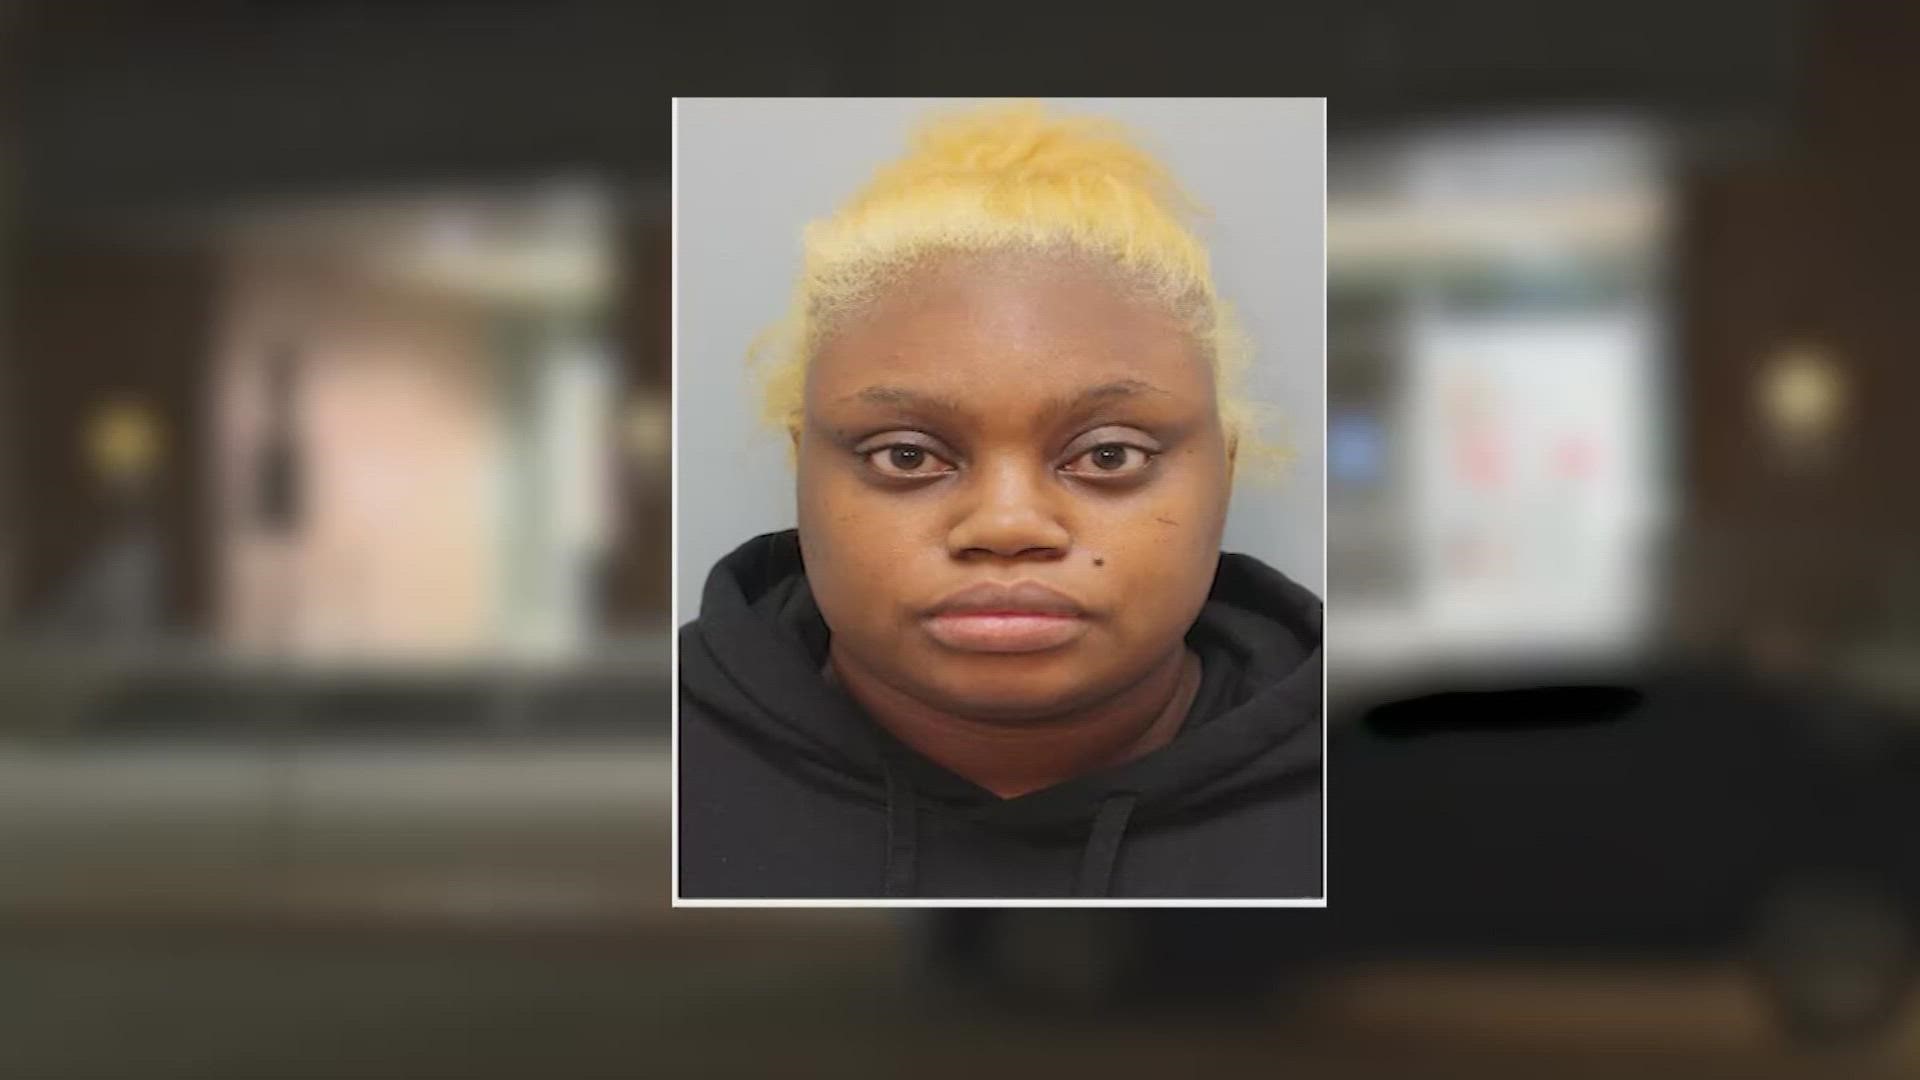 Gloria Williams, the mother charged in connection with the death of her son whose remains were found with abandoned siblings in an apartment, apologizes from jail.